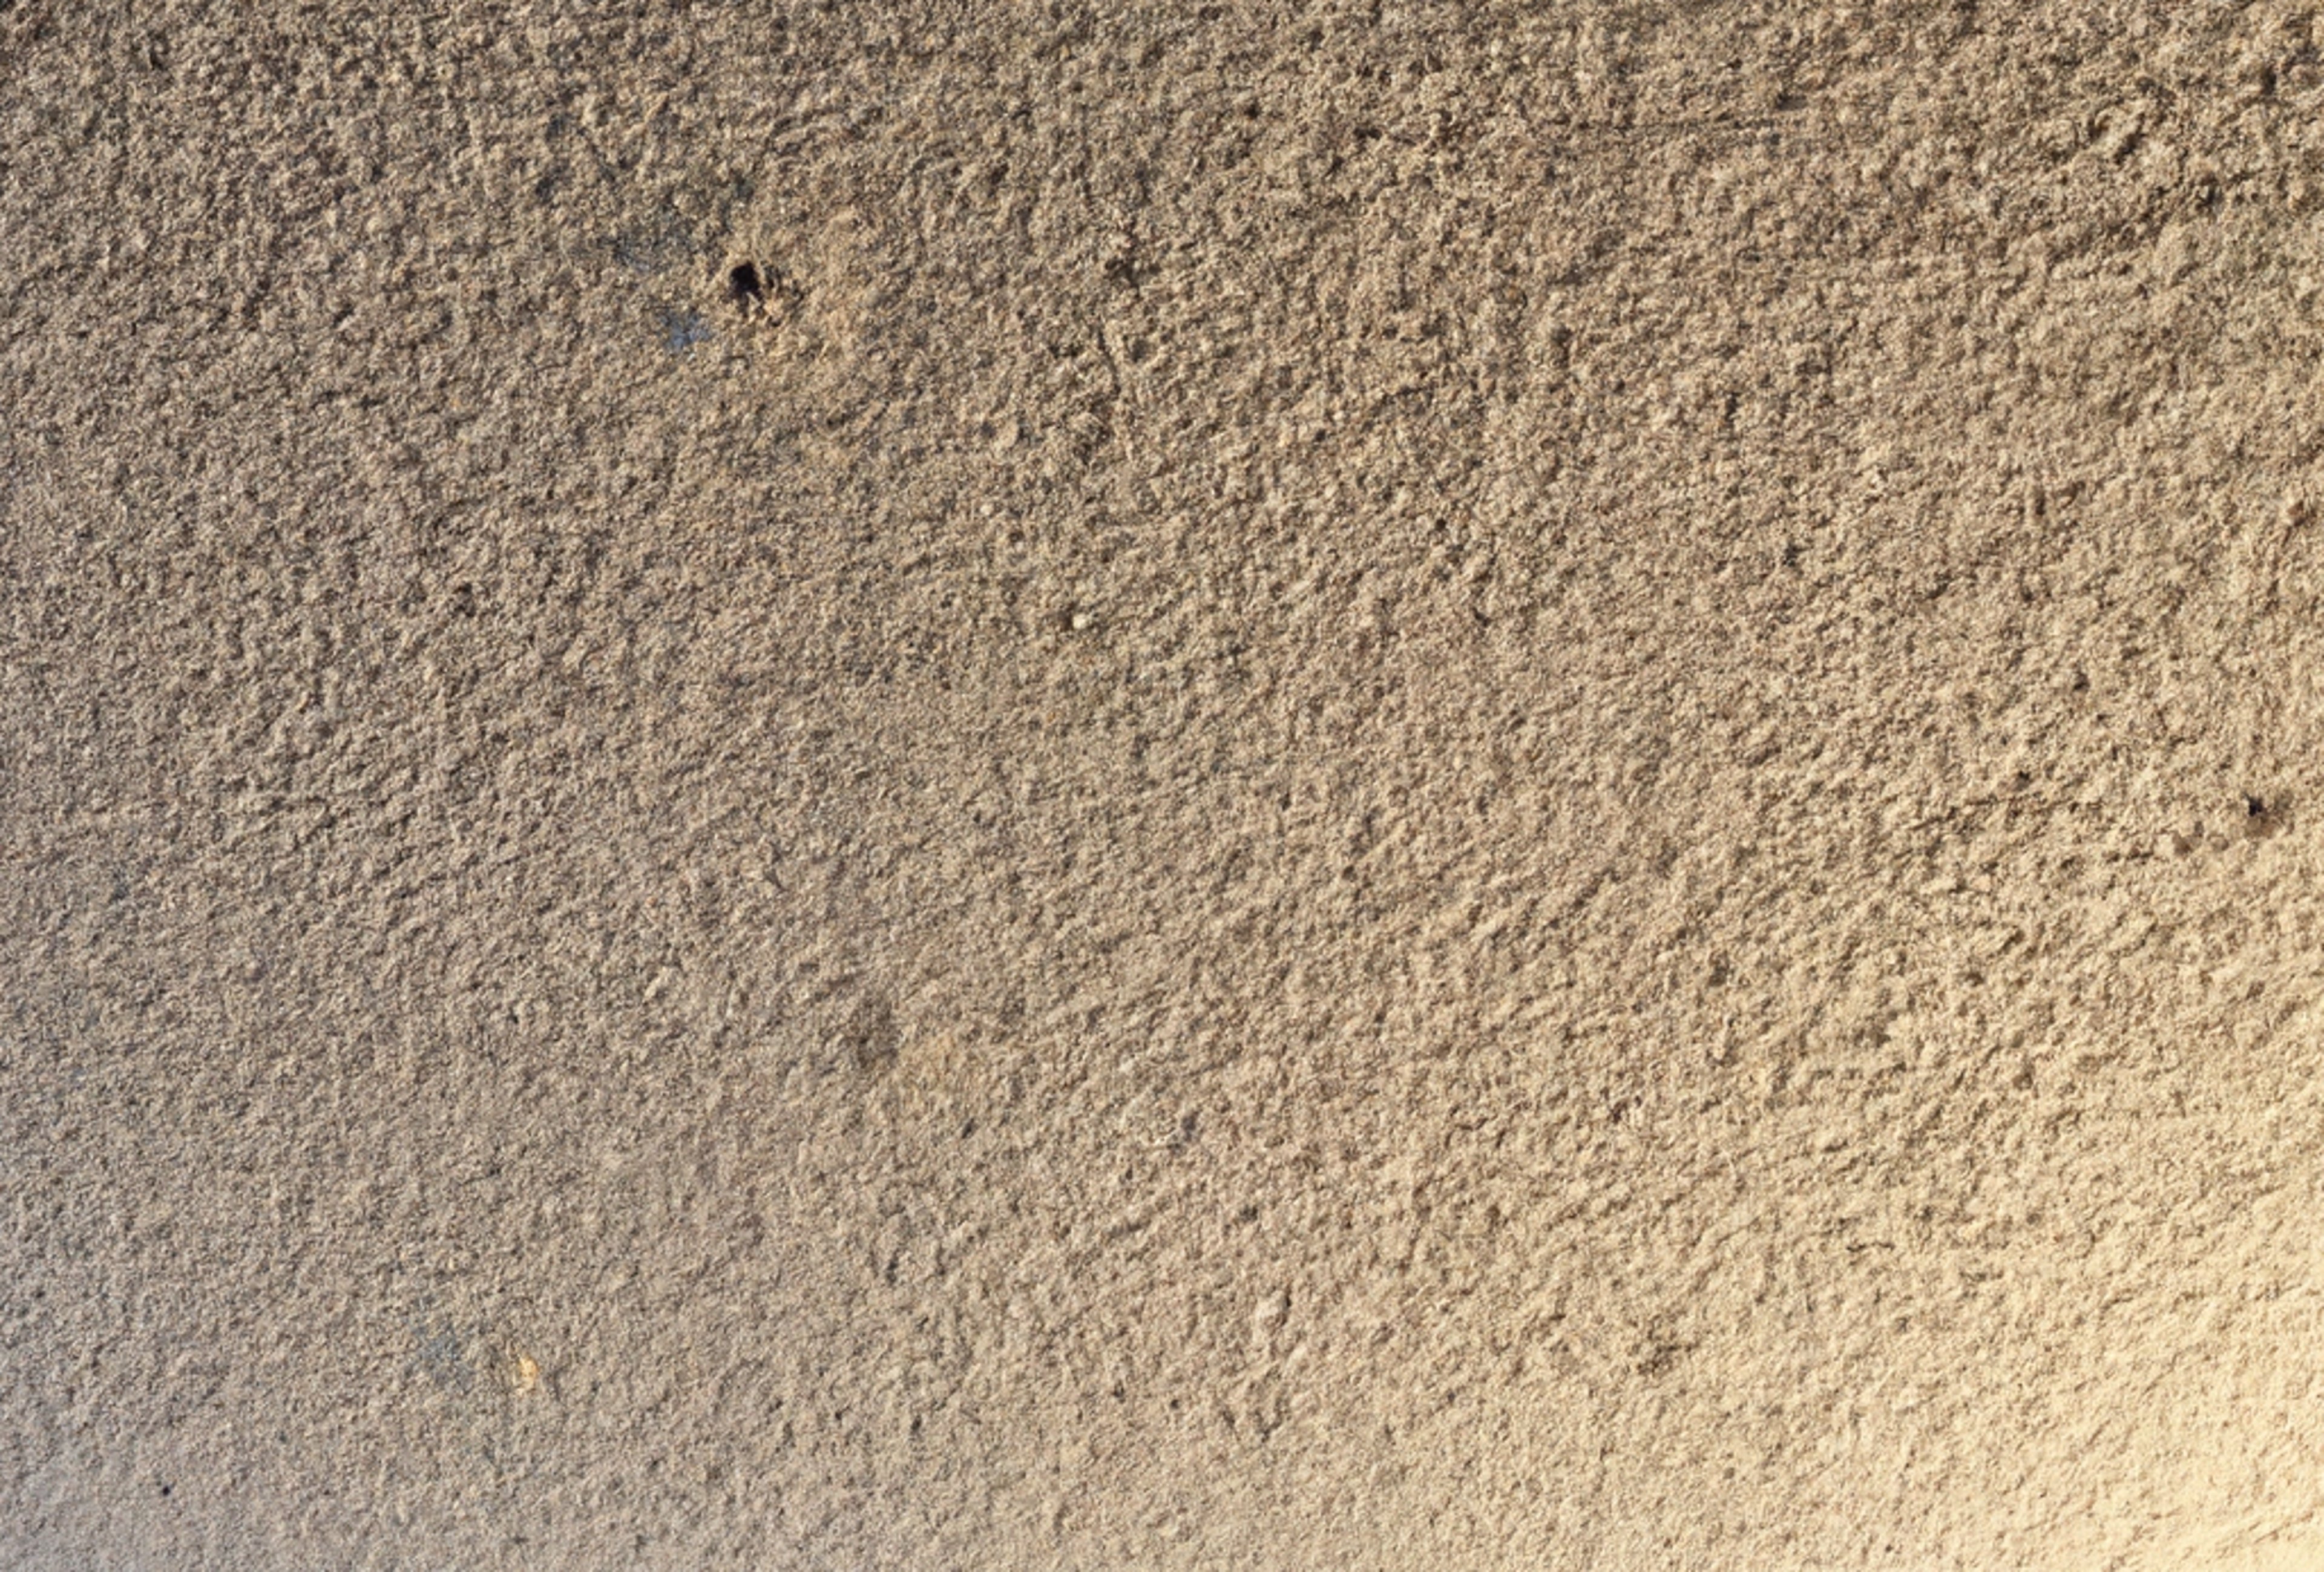 How to Dust Popcorn Ceilings